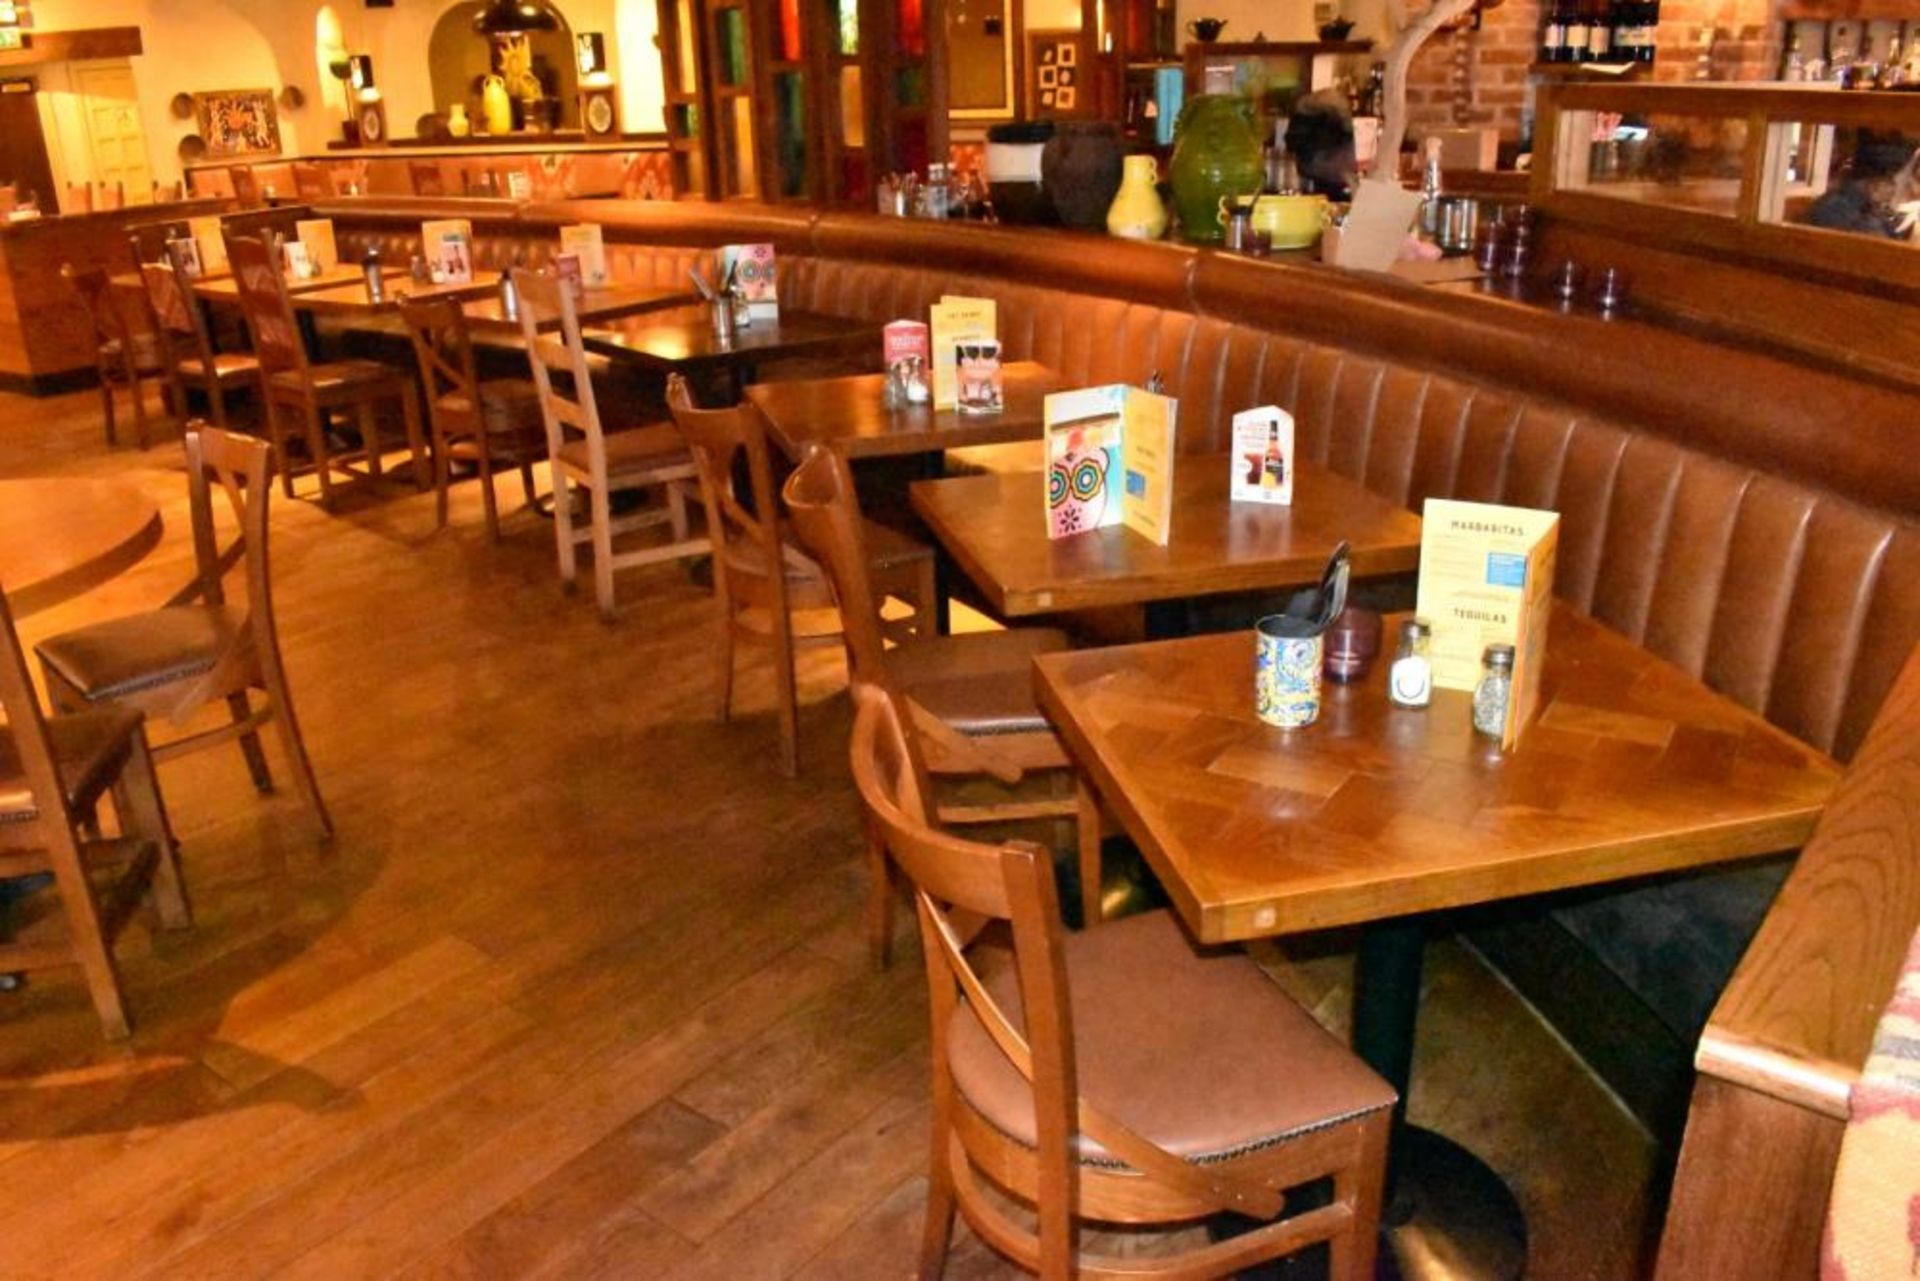 1 x Long Curved Seating Bench From Mexican Themed Restaurant - CL461 - Ref PR891 - Location: London - Image 2 of 14